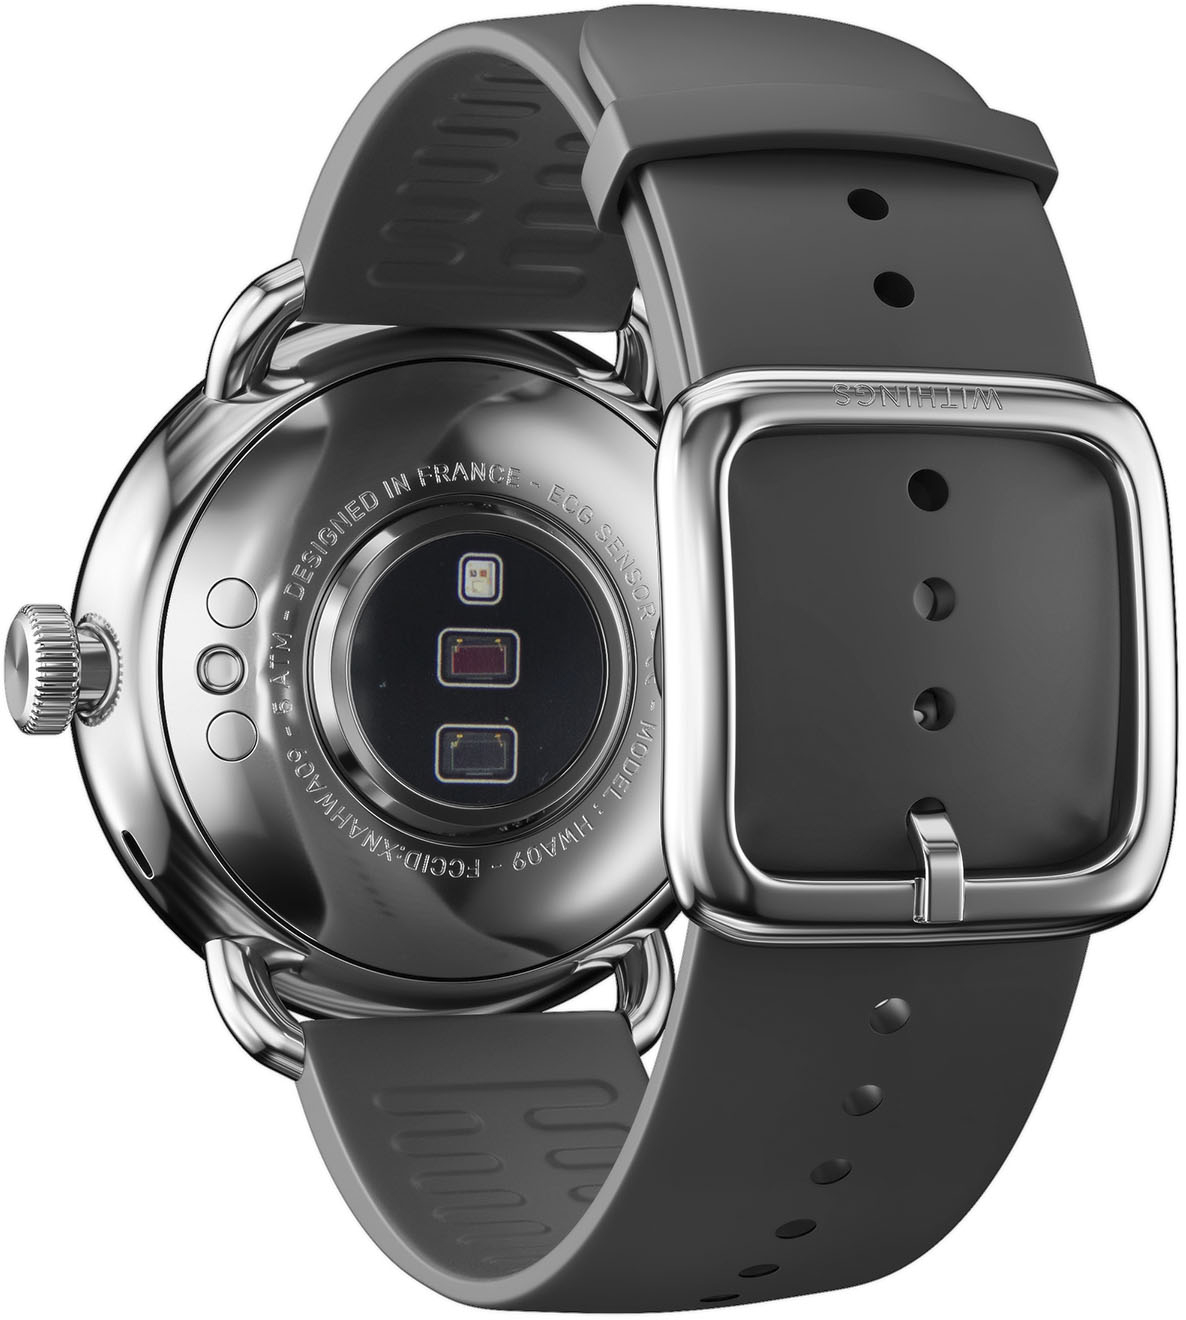 Withings ScanWatch Hybrid Smartwatch with ECG, heart rate and